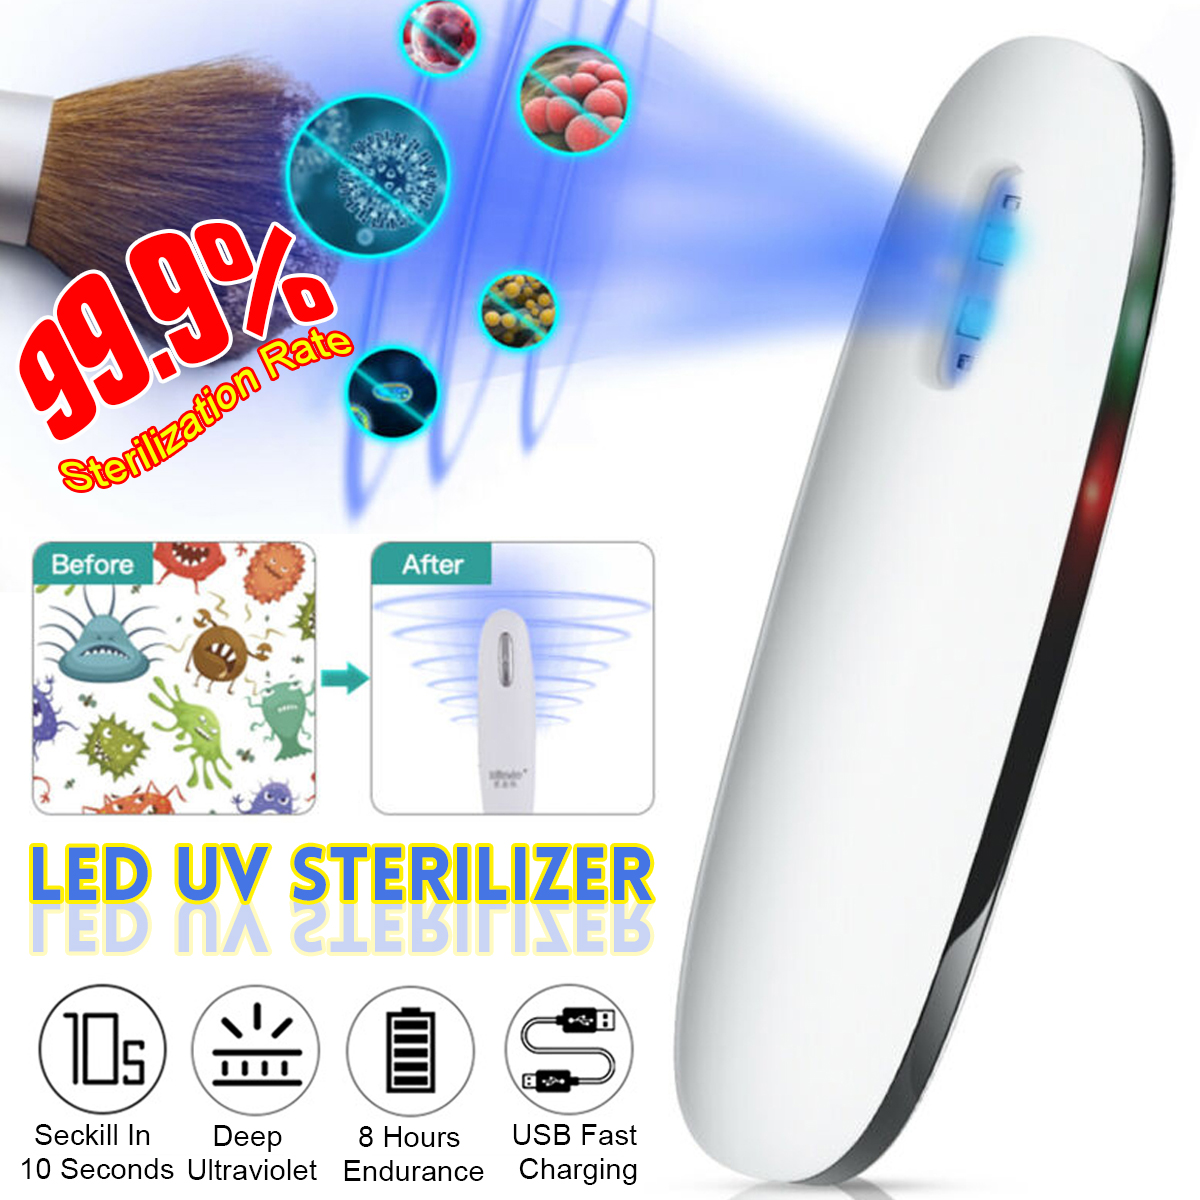 Portable-UV-Sterilizer-Lamp-LED-Electric-Ultraviolet-Disinfector-Light-For-Computer-Phone-Cosmetic-C-1651050-2